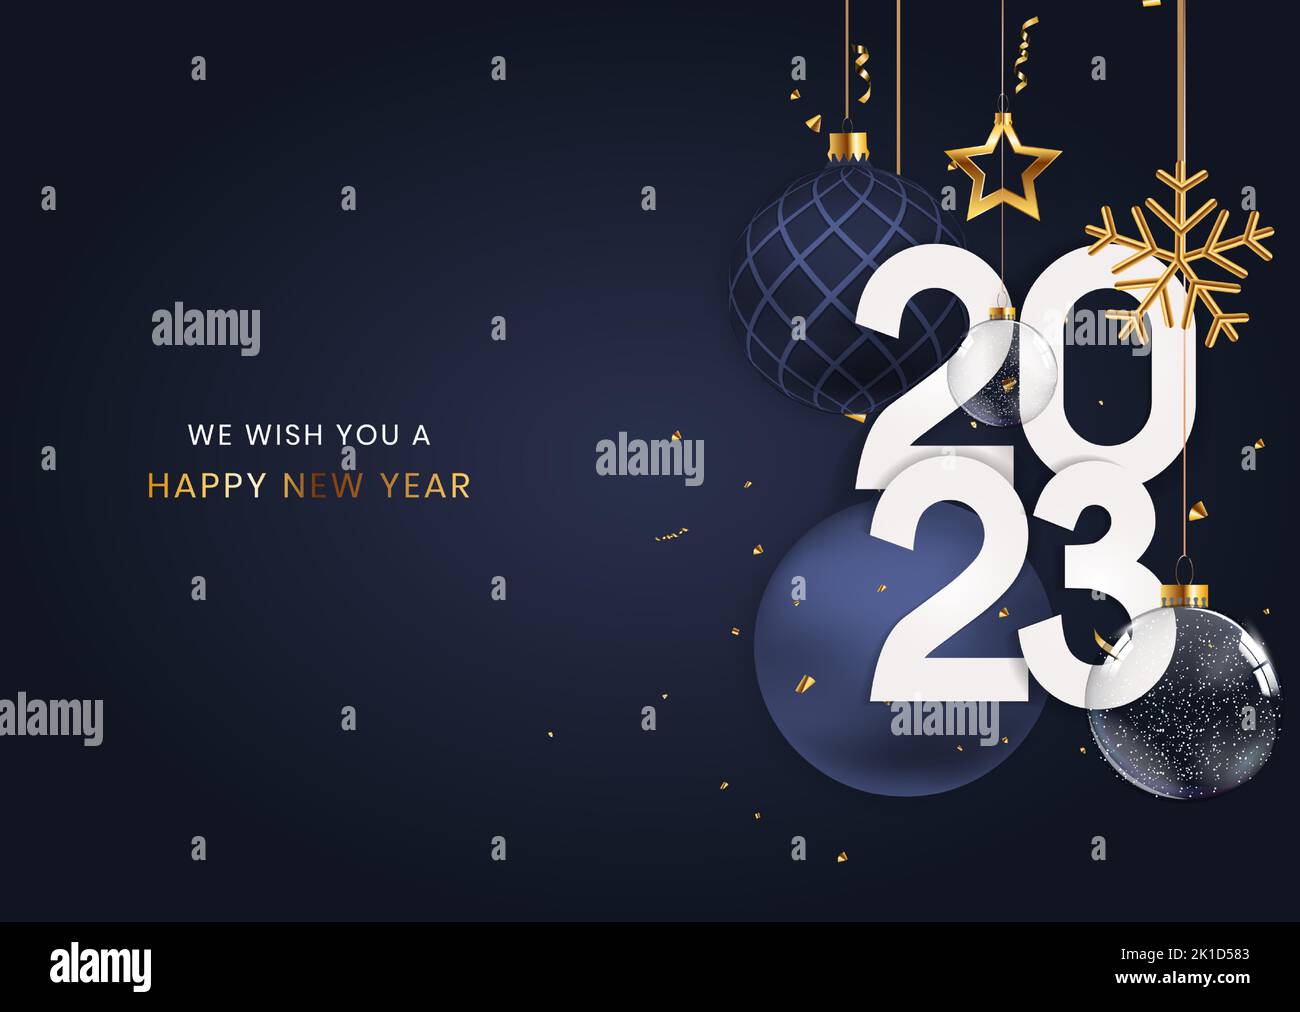 Greeting Card 2023 Happy New Year. Vector Illustration Stock Vector